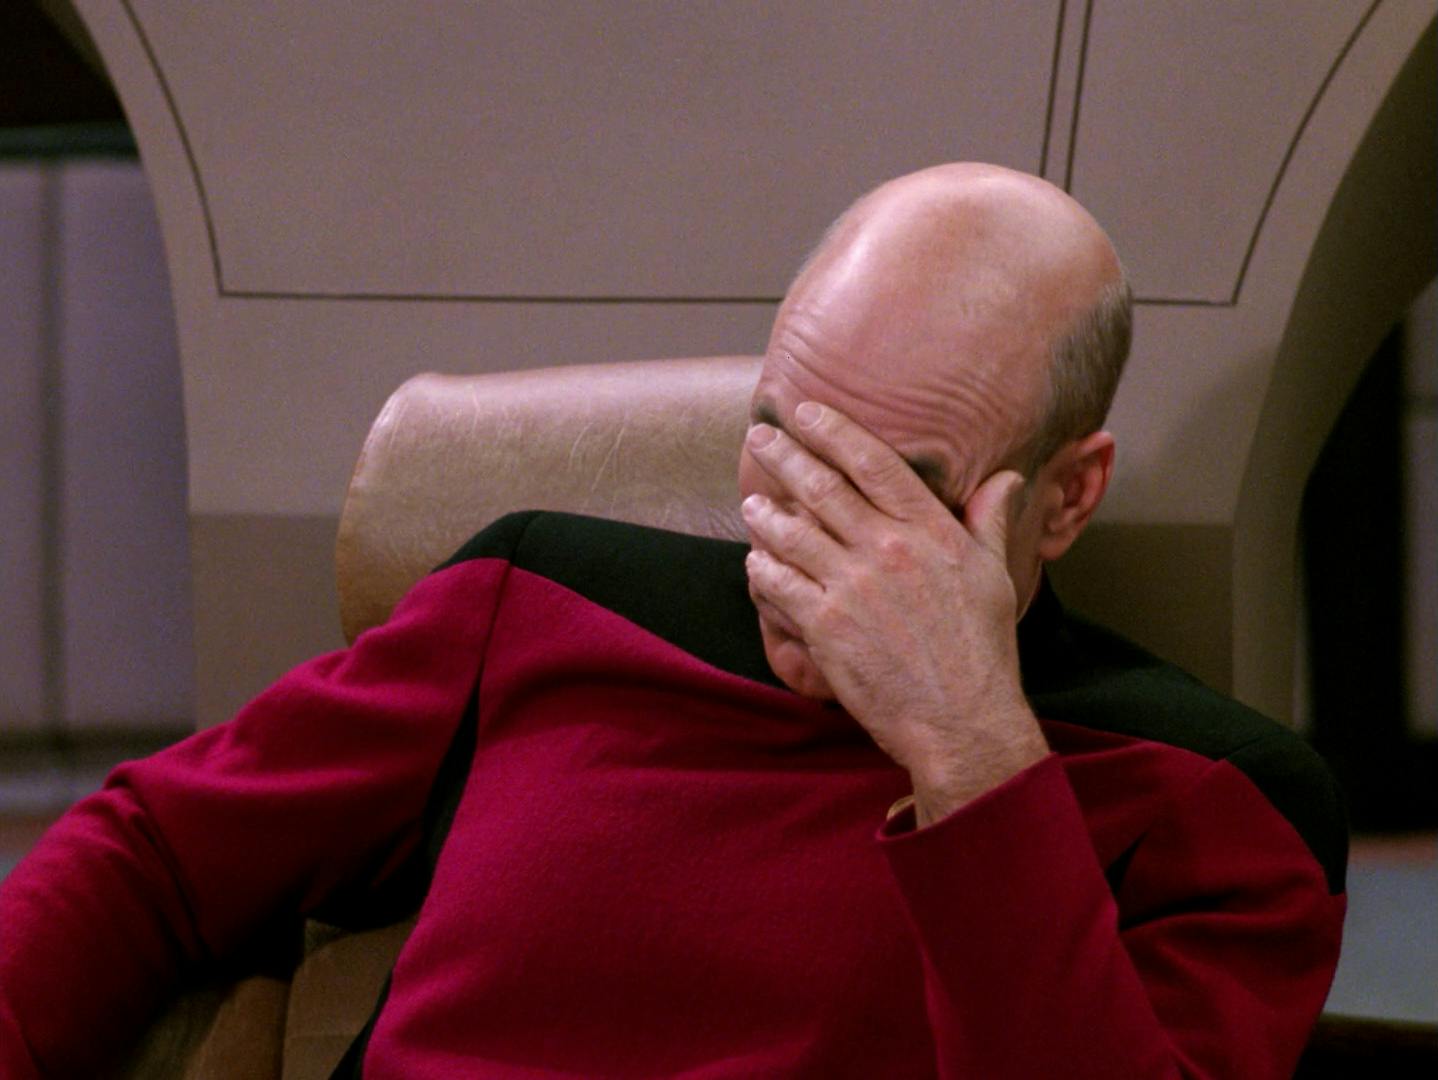 Jean Luc-Picard brings the palm of his hand to his face in reaction to Q's presence on the bridge of the Enterprise in 'Deja Q'